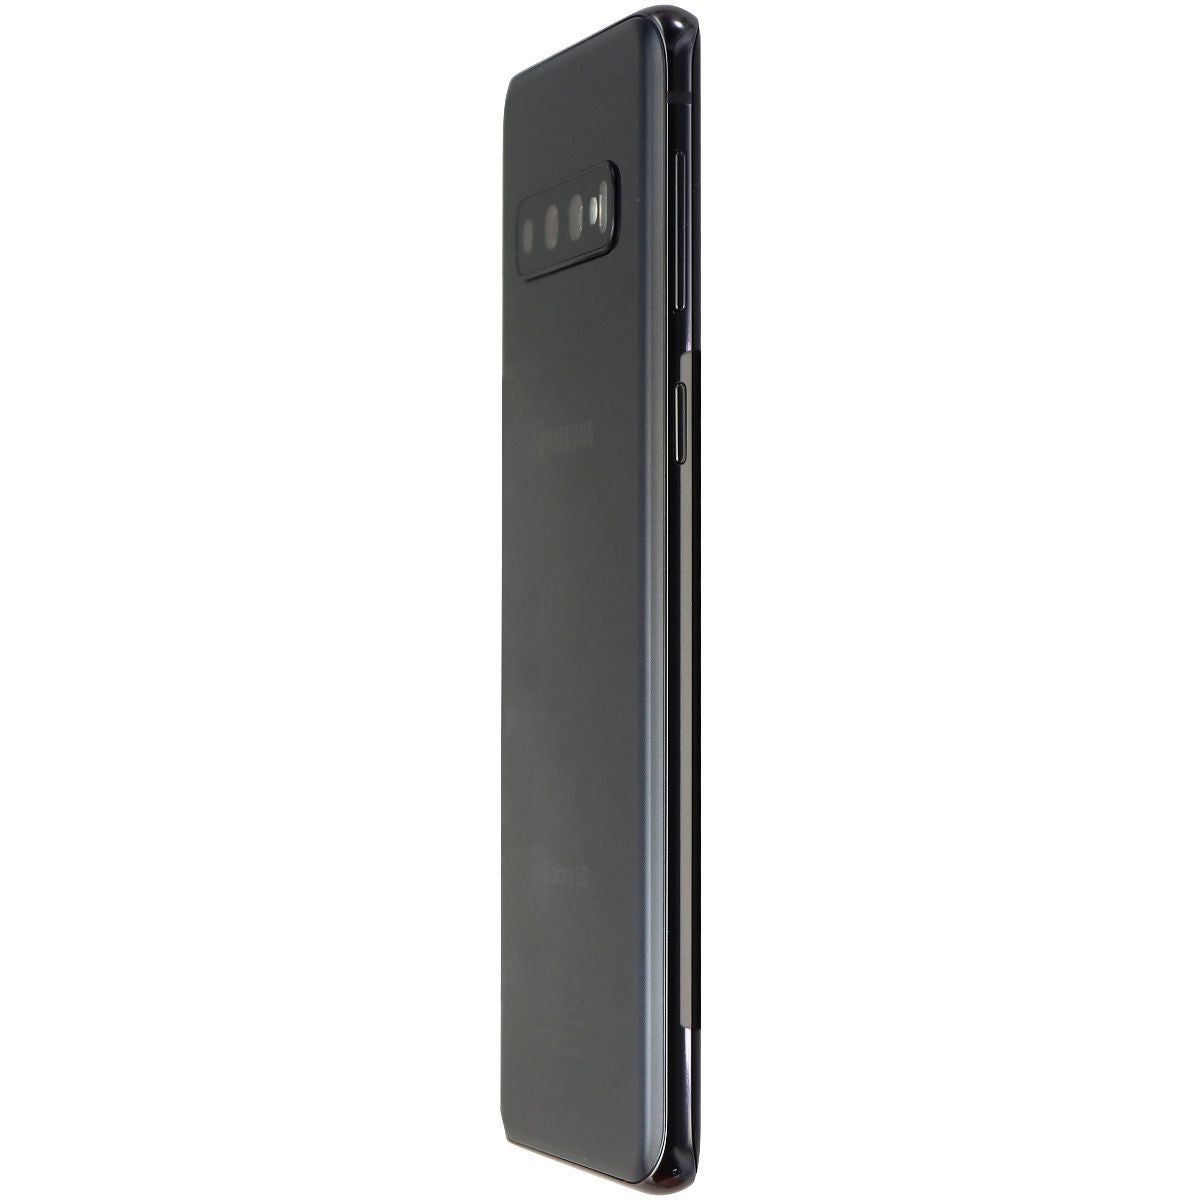 Samsung Galaxy S10 (6.1-inch) Smartphone SM-G973U (T-Mobile) - 128GB/Prism Black Cell Phones & Smartphones Samsung    - Simple Cell Bulk Wholesale Pricing - USA Seller